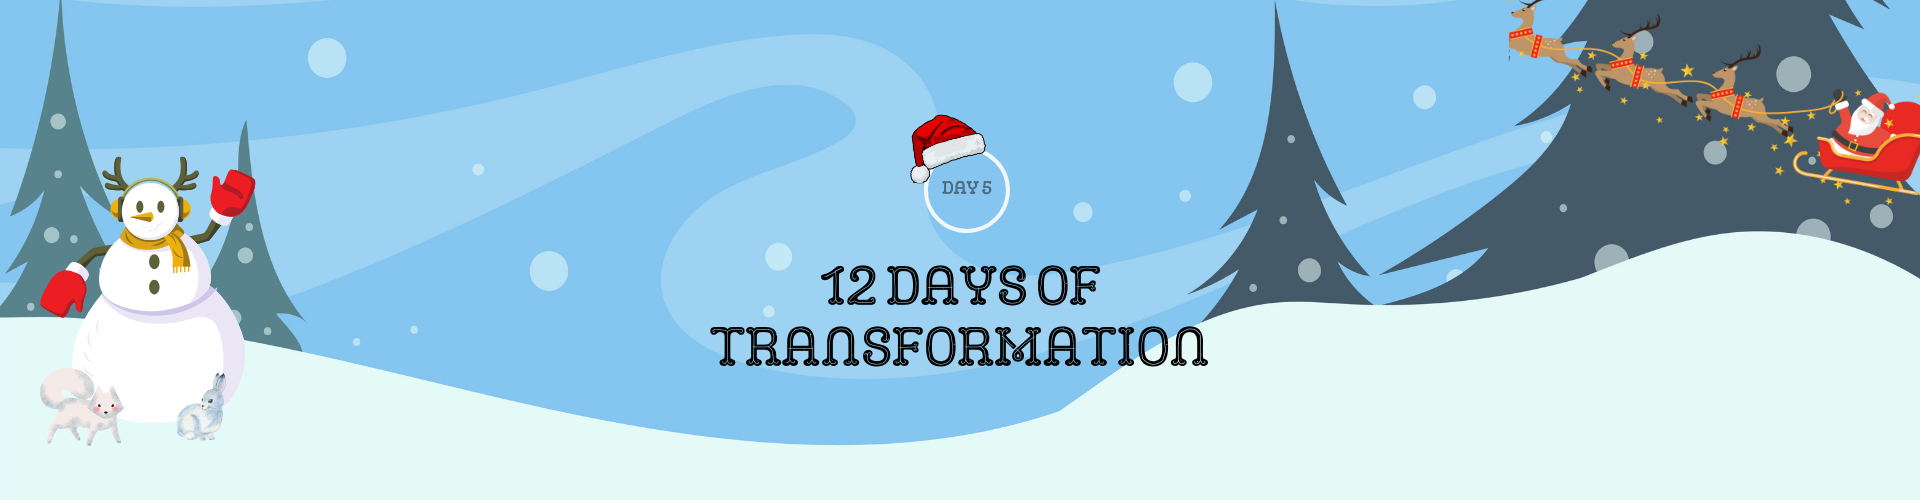 12 Days of Transformation Blog Banner | Festive winter holidays-themed banner with a cheerful snowman and Santa Claus riding his sleigh | Day 5